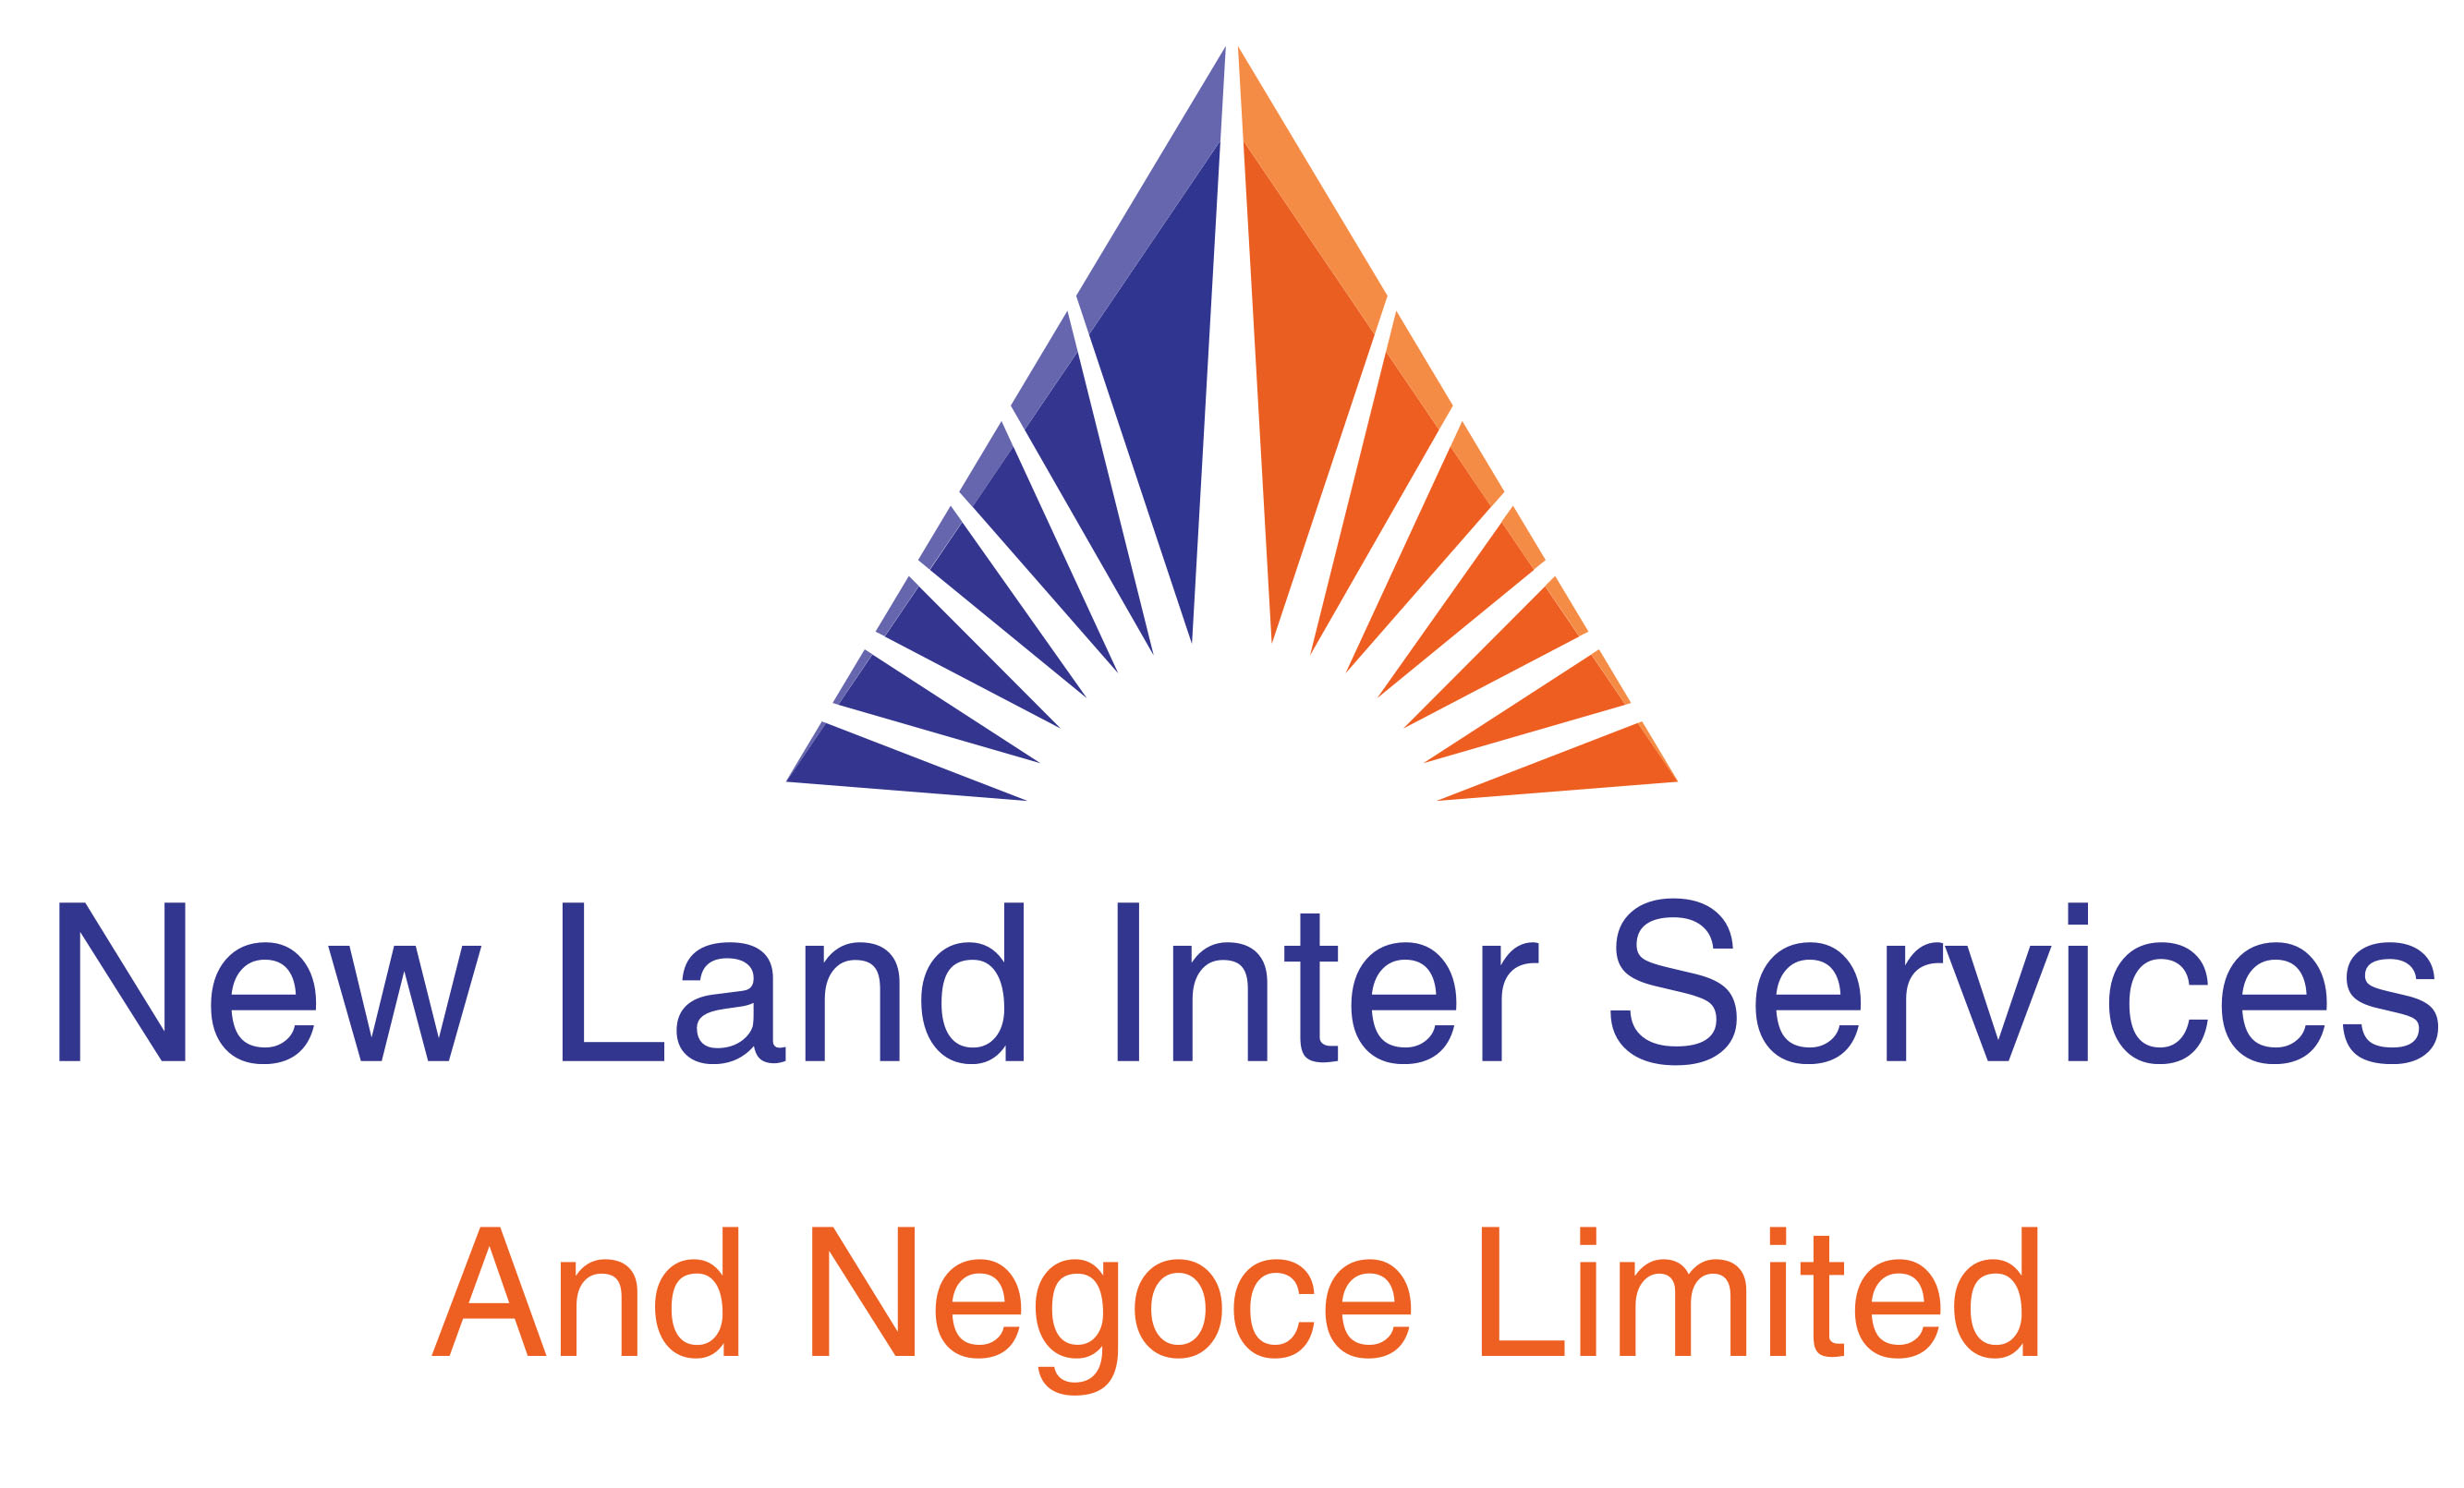 New Land Inter Services and Negoce Limited